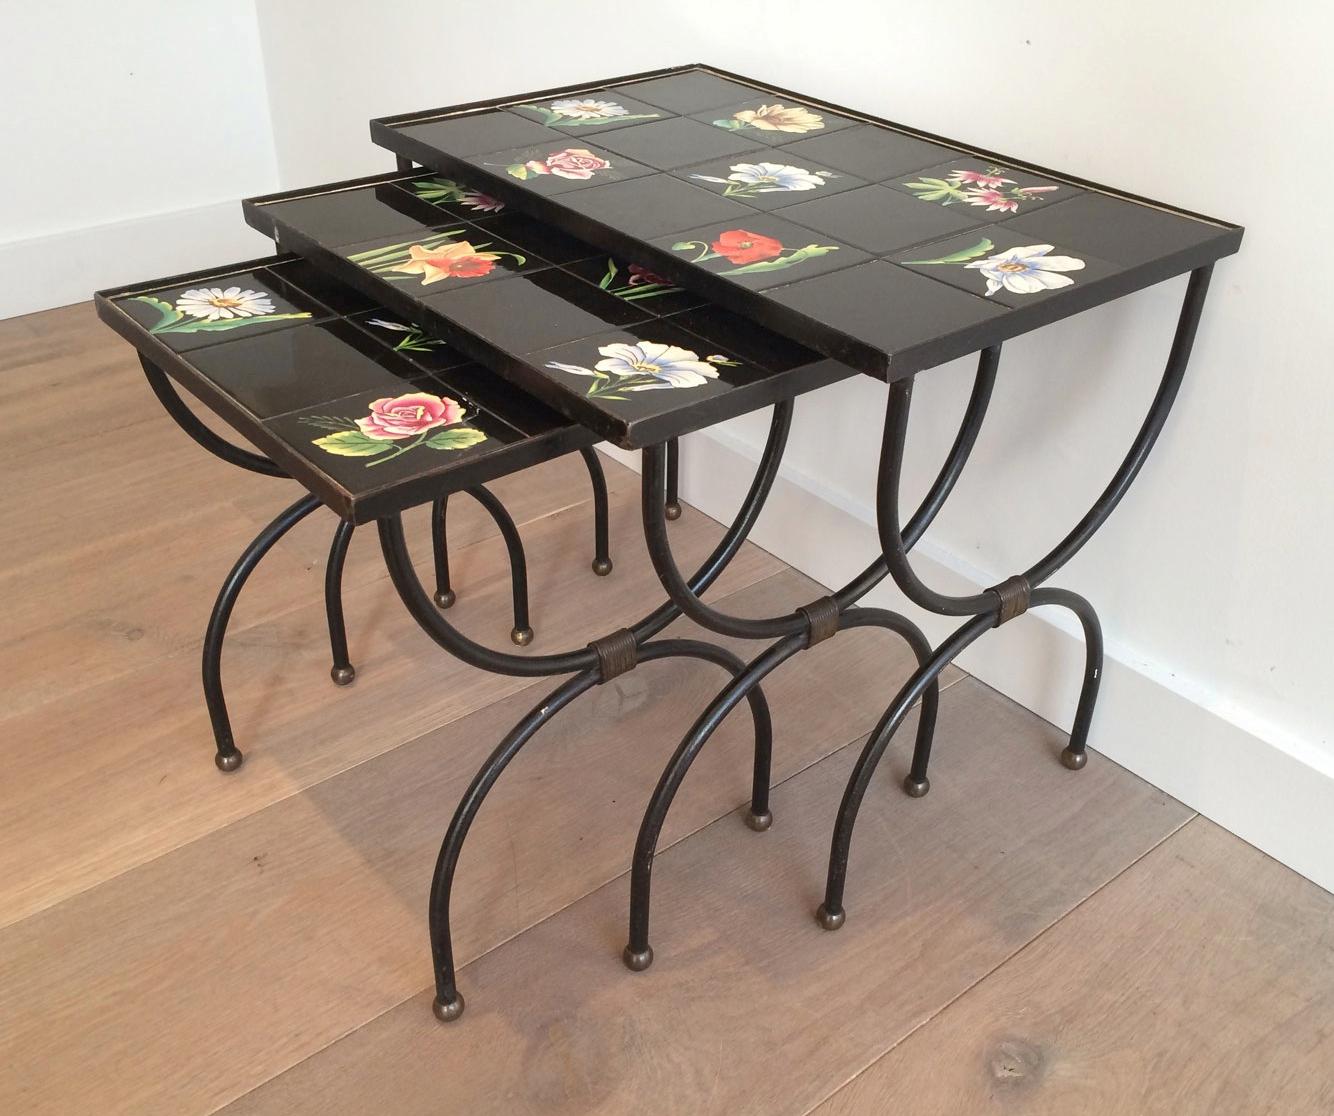 Mid-20th Century Unusual Ceramic and Black Iron Nesting Tables, French Work, circa 1950 For Sale